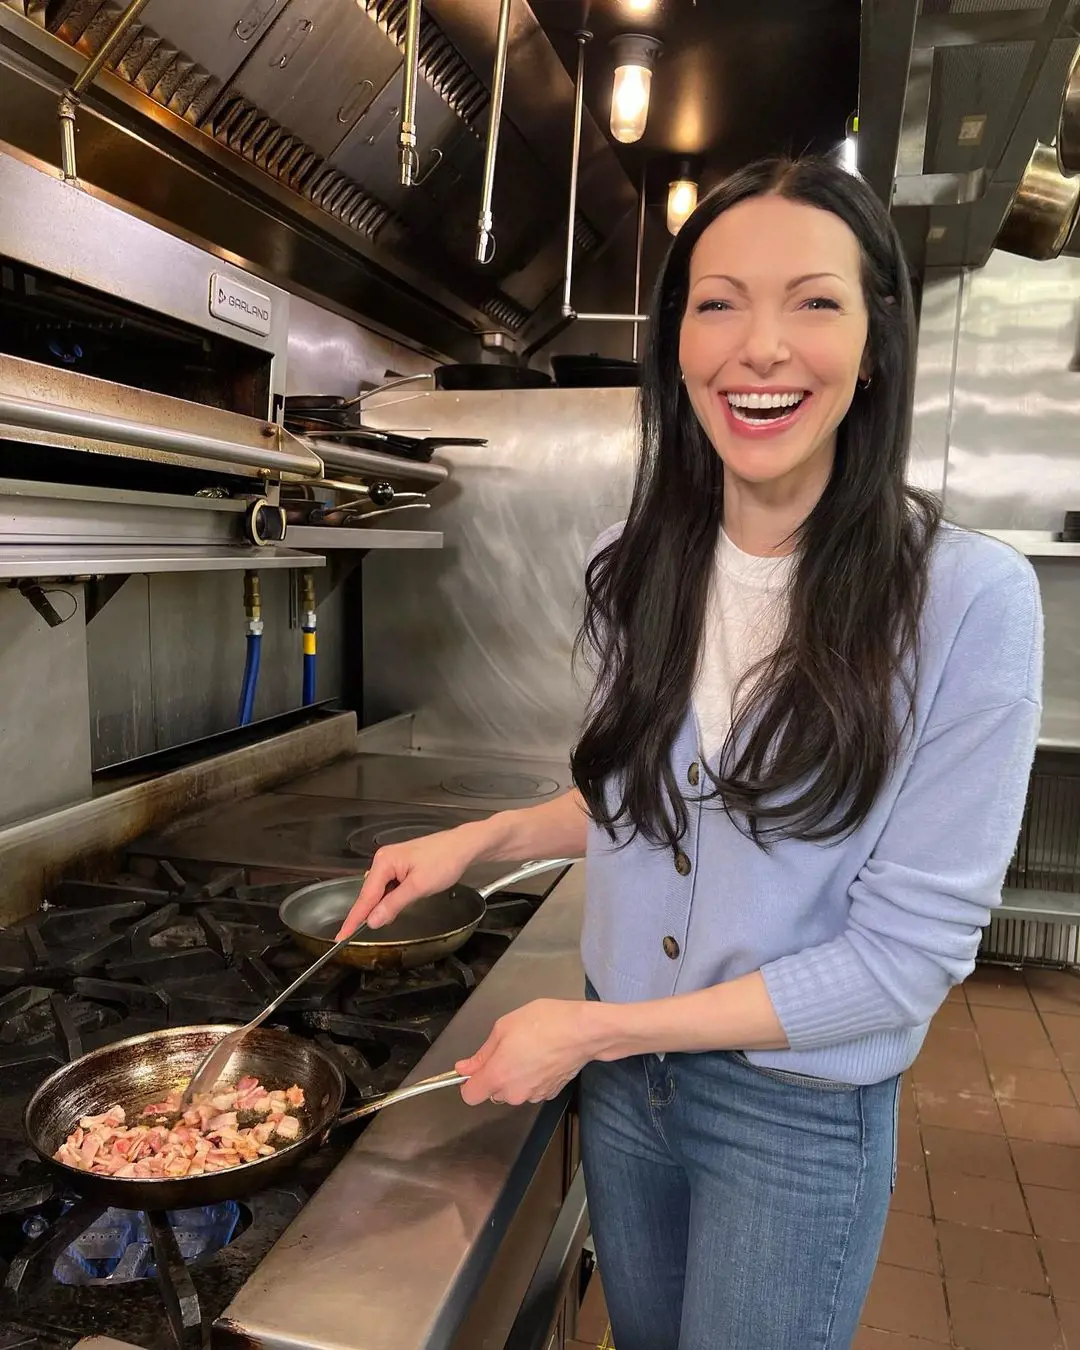 Laura looks delightful as she gets captured while cooking one of her nutritious meal